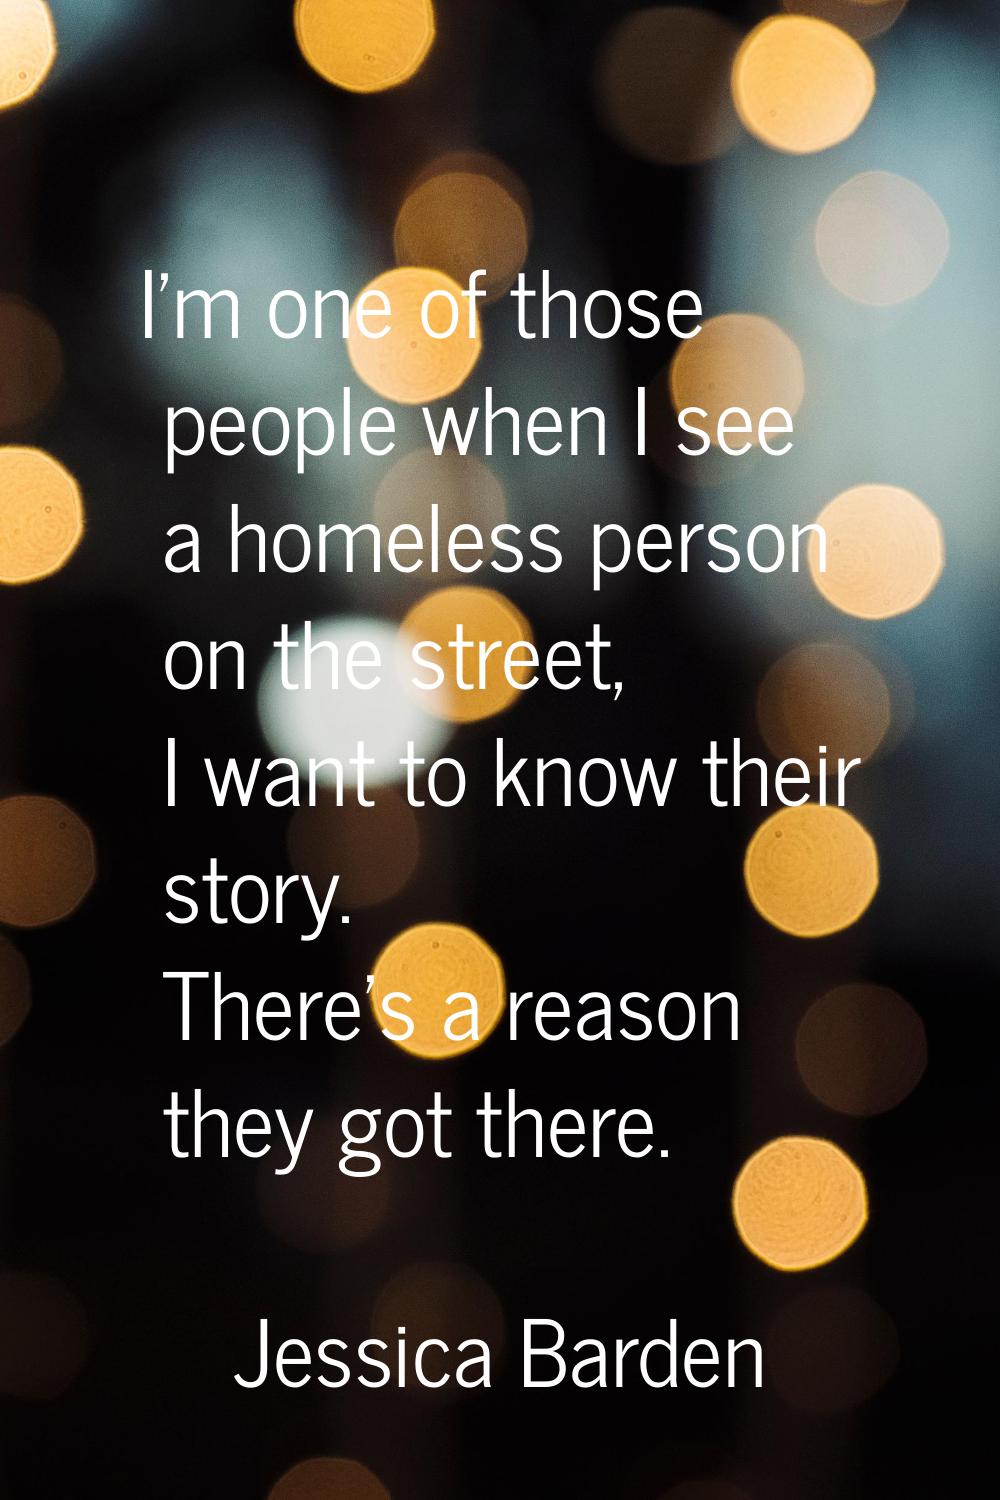 I’m one of those people when I see a homeless person on the street, I want to know their story. The